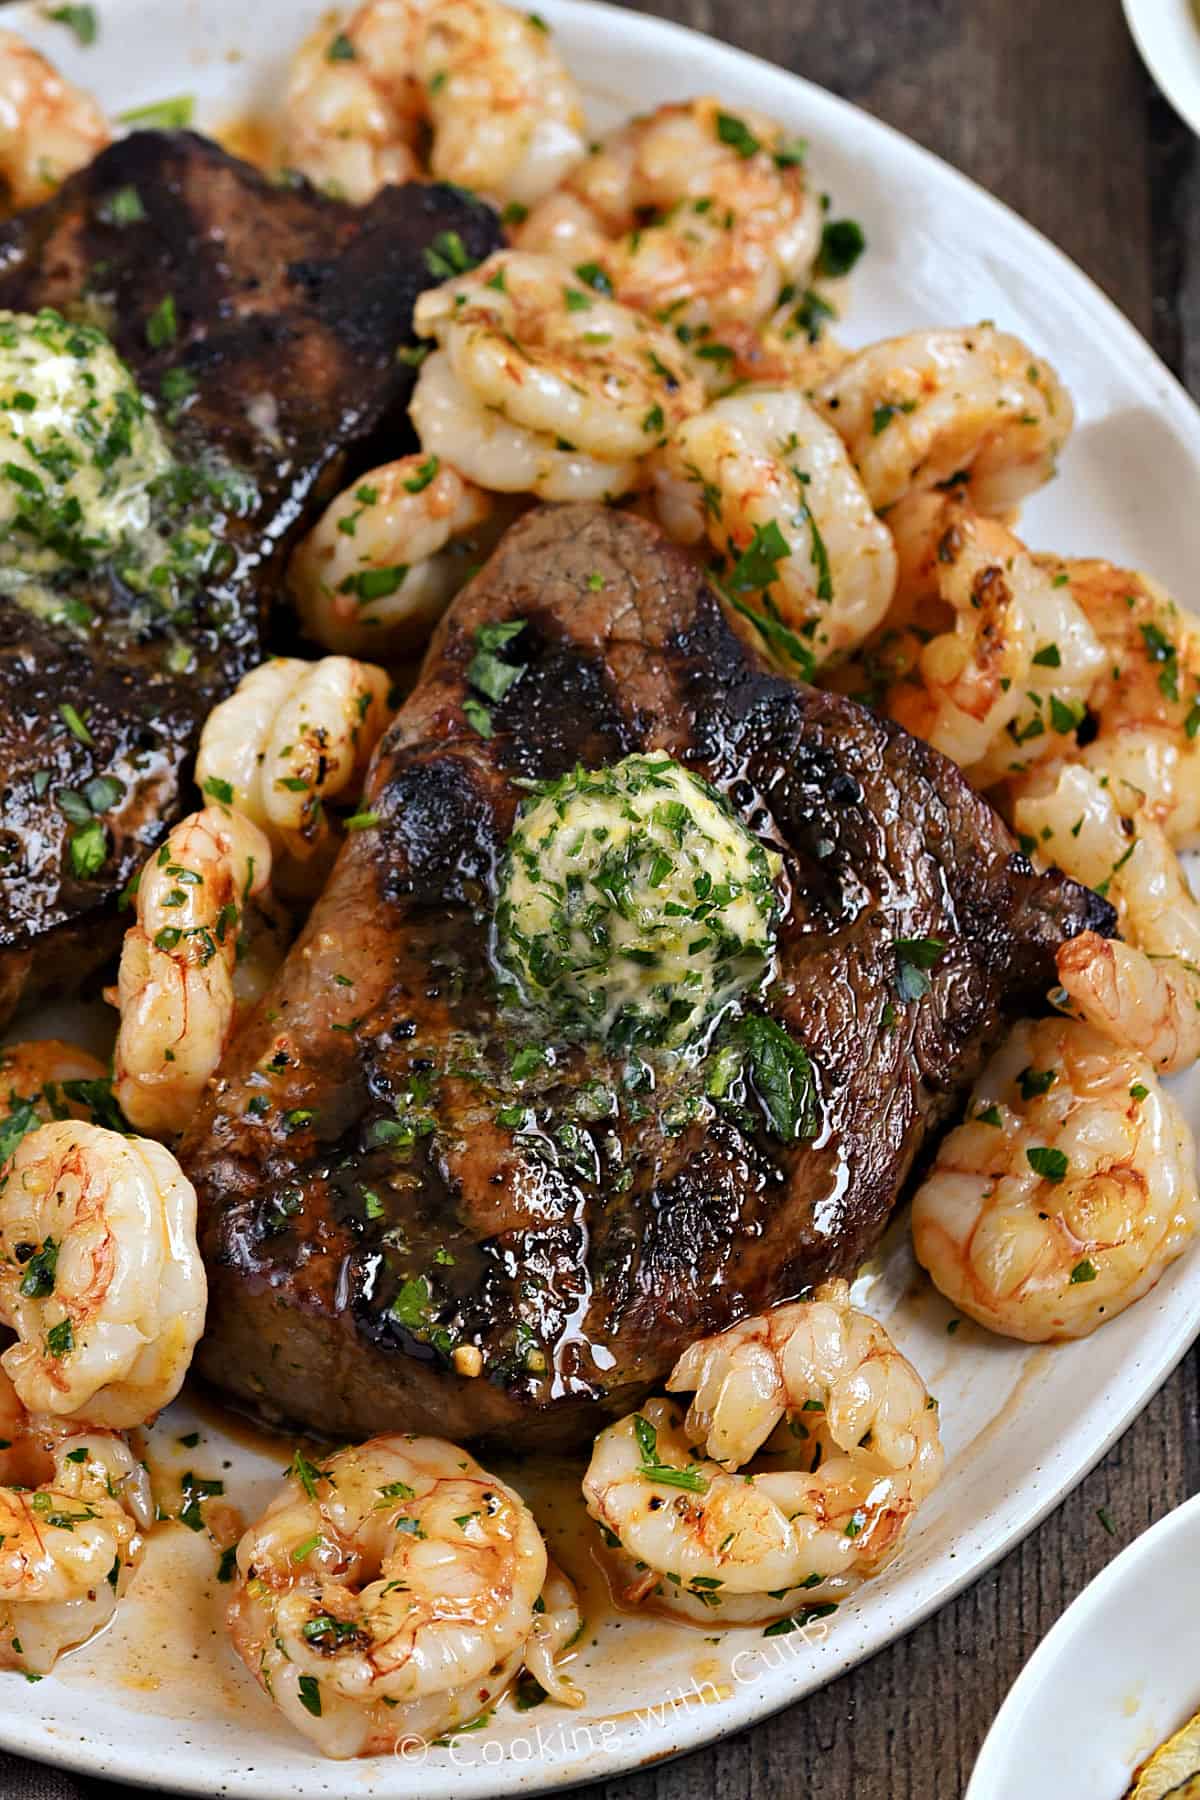 Looking down on a plate of Grilled Steak and Shrimp topped with garlic-lemon butter.